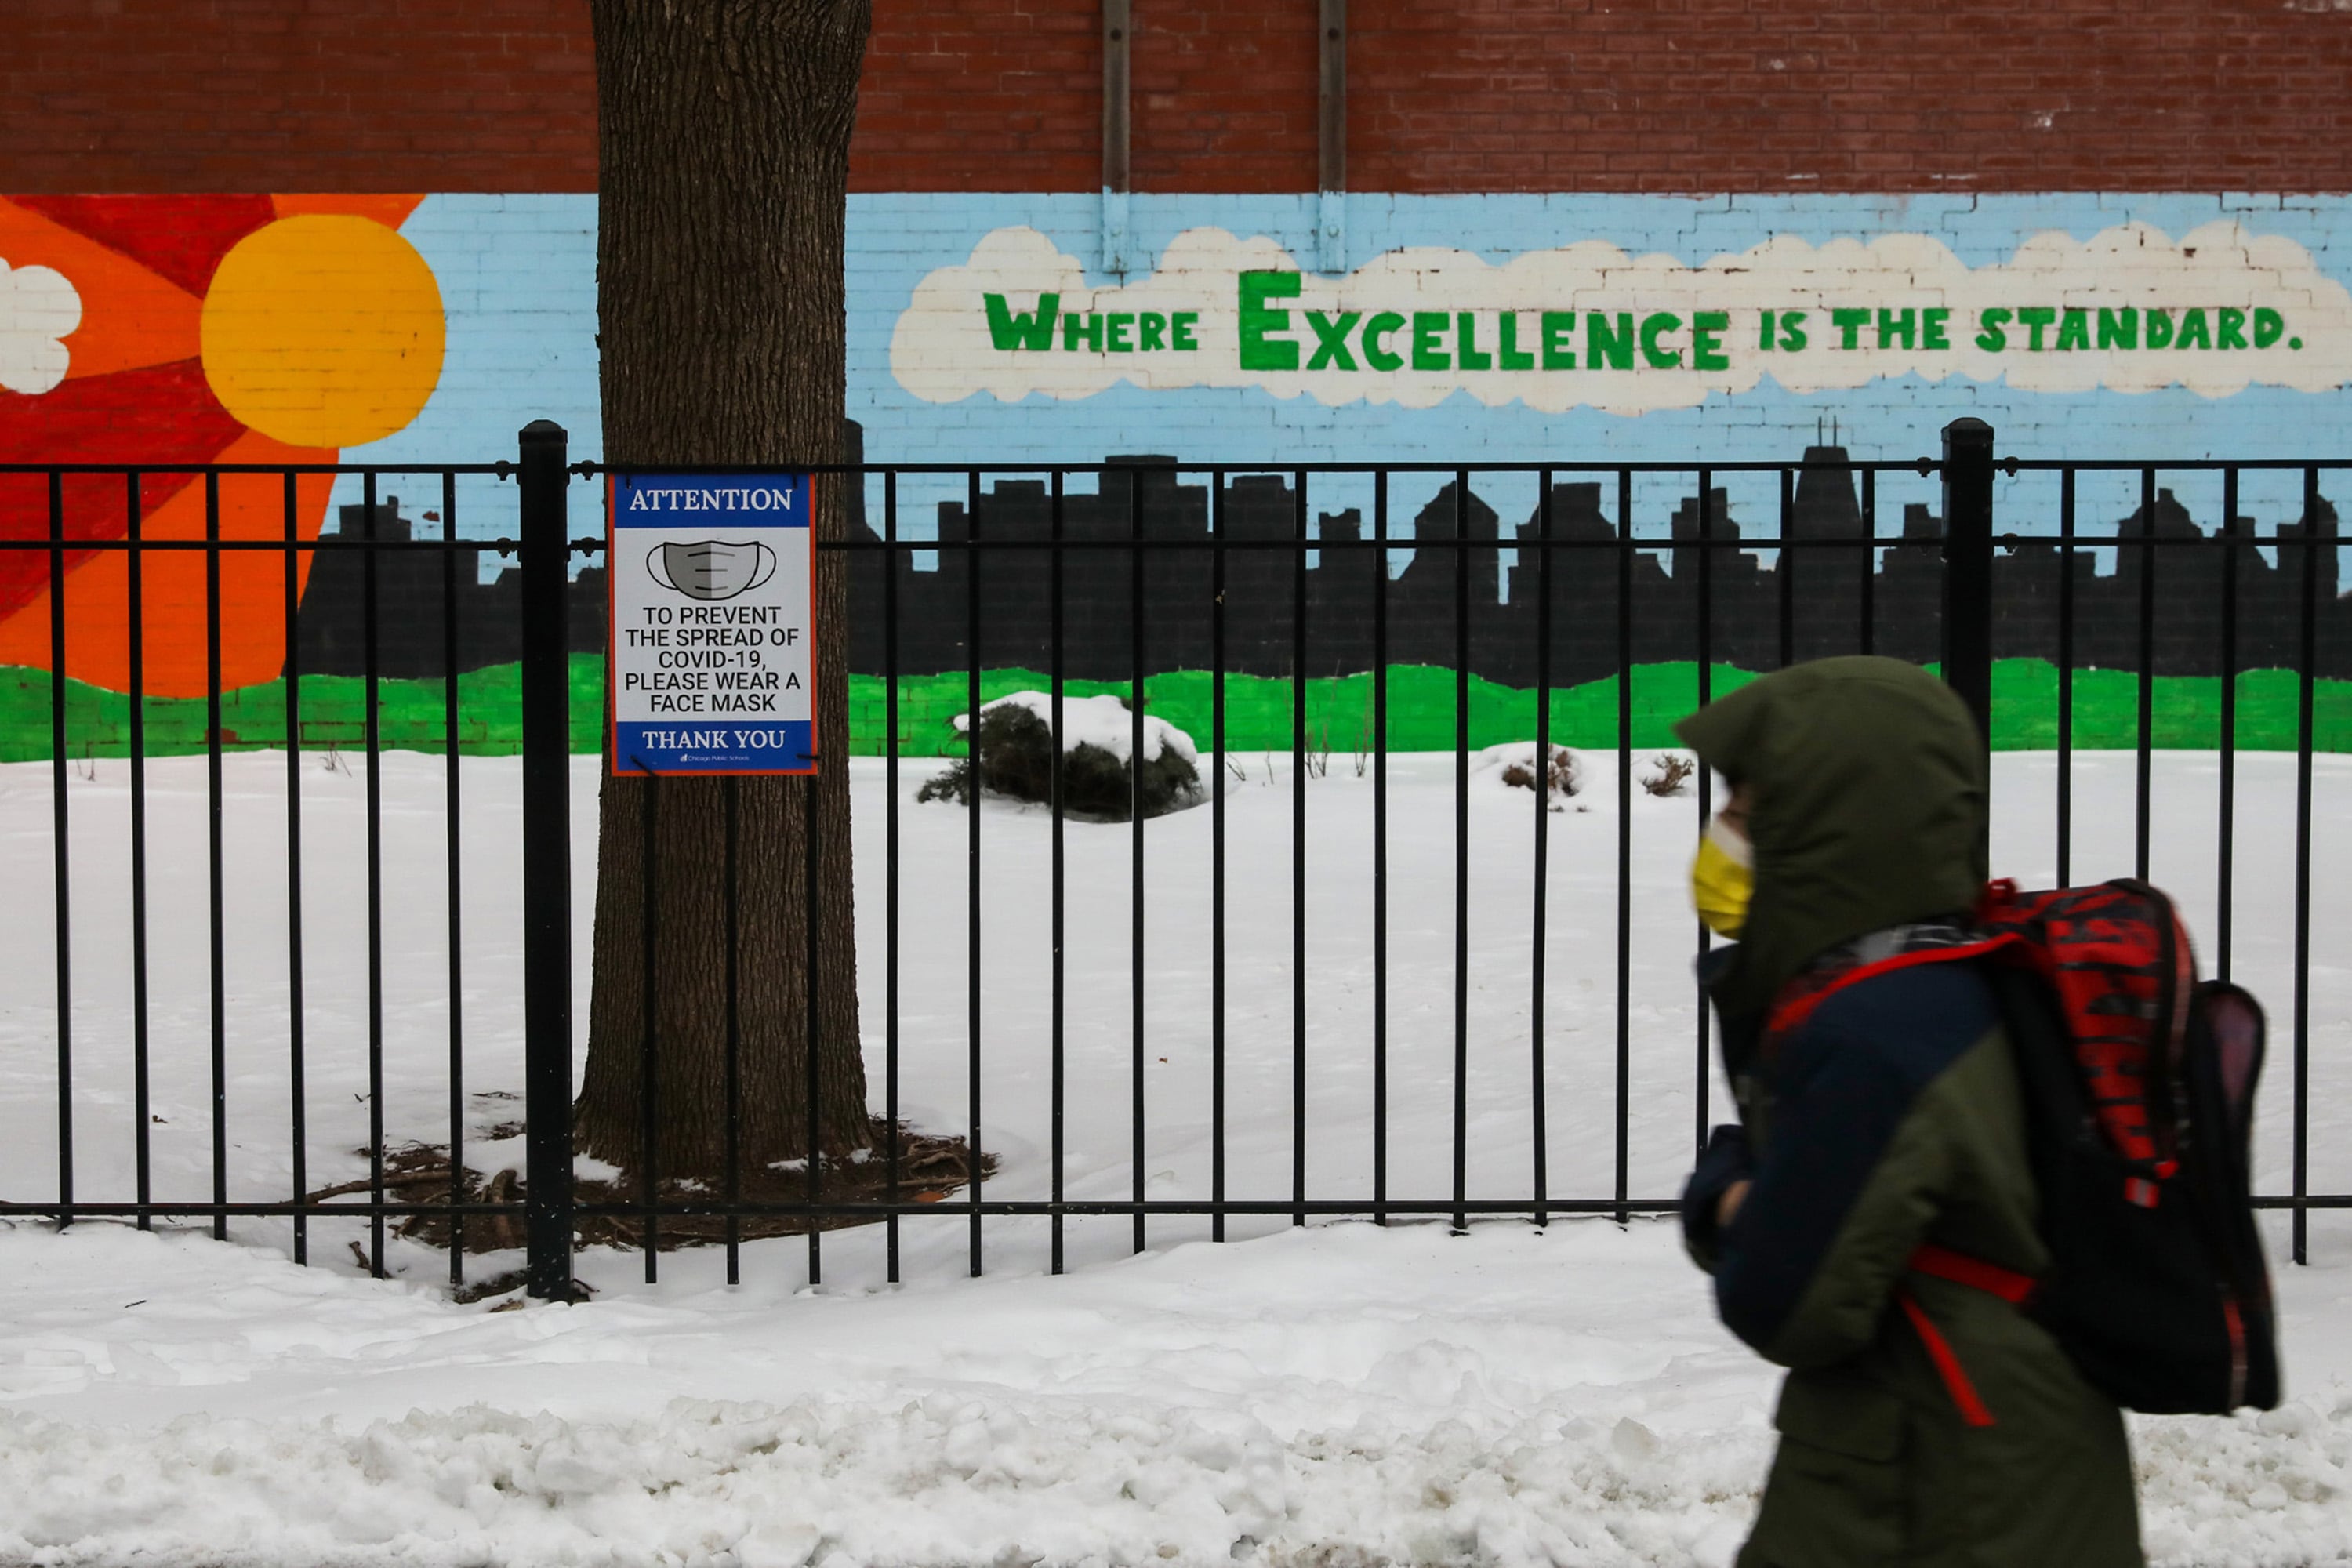 A student, wearing a mask, hooded winter jacket and backpack, walks past a school mural that reads “Where excellence is the standard” and a sign calling for people to wear a mask.